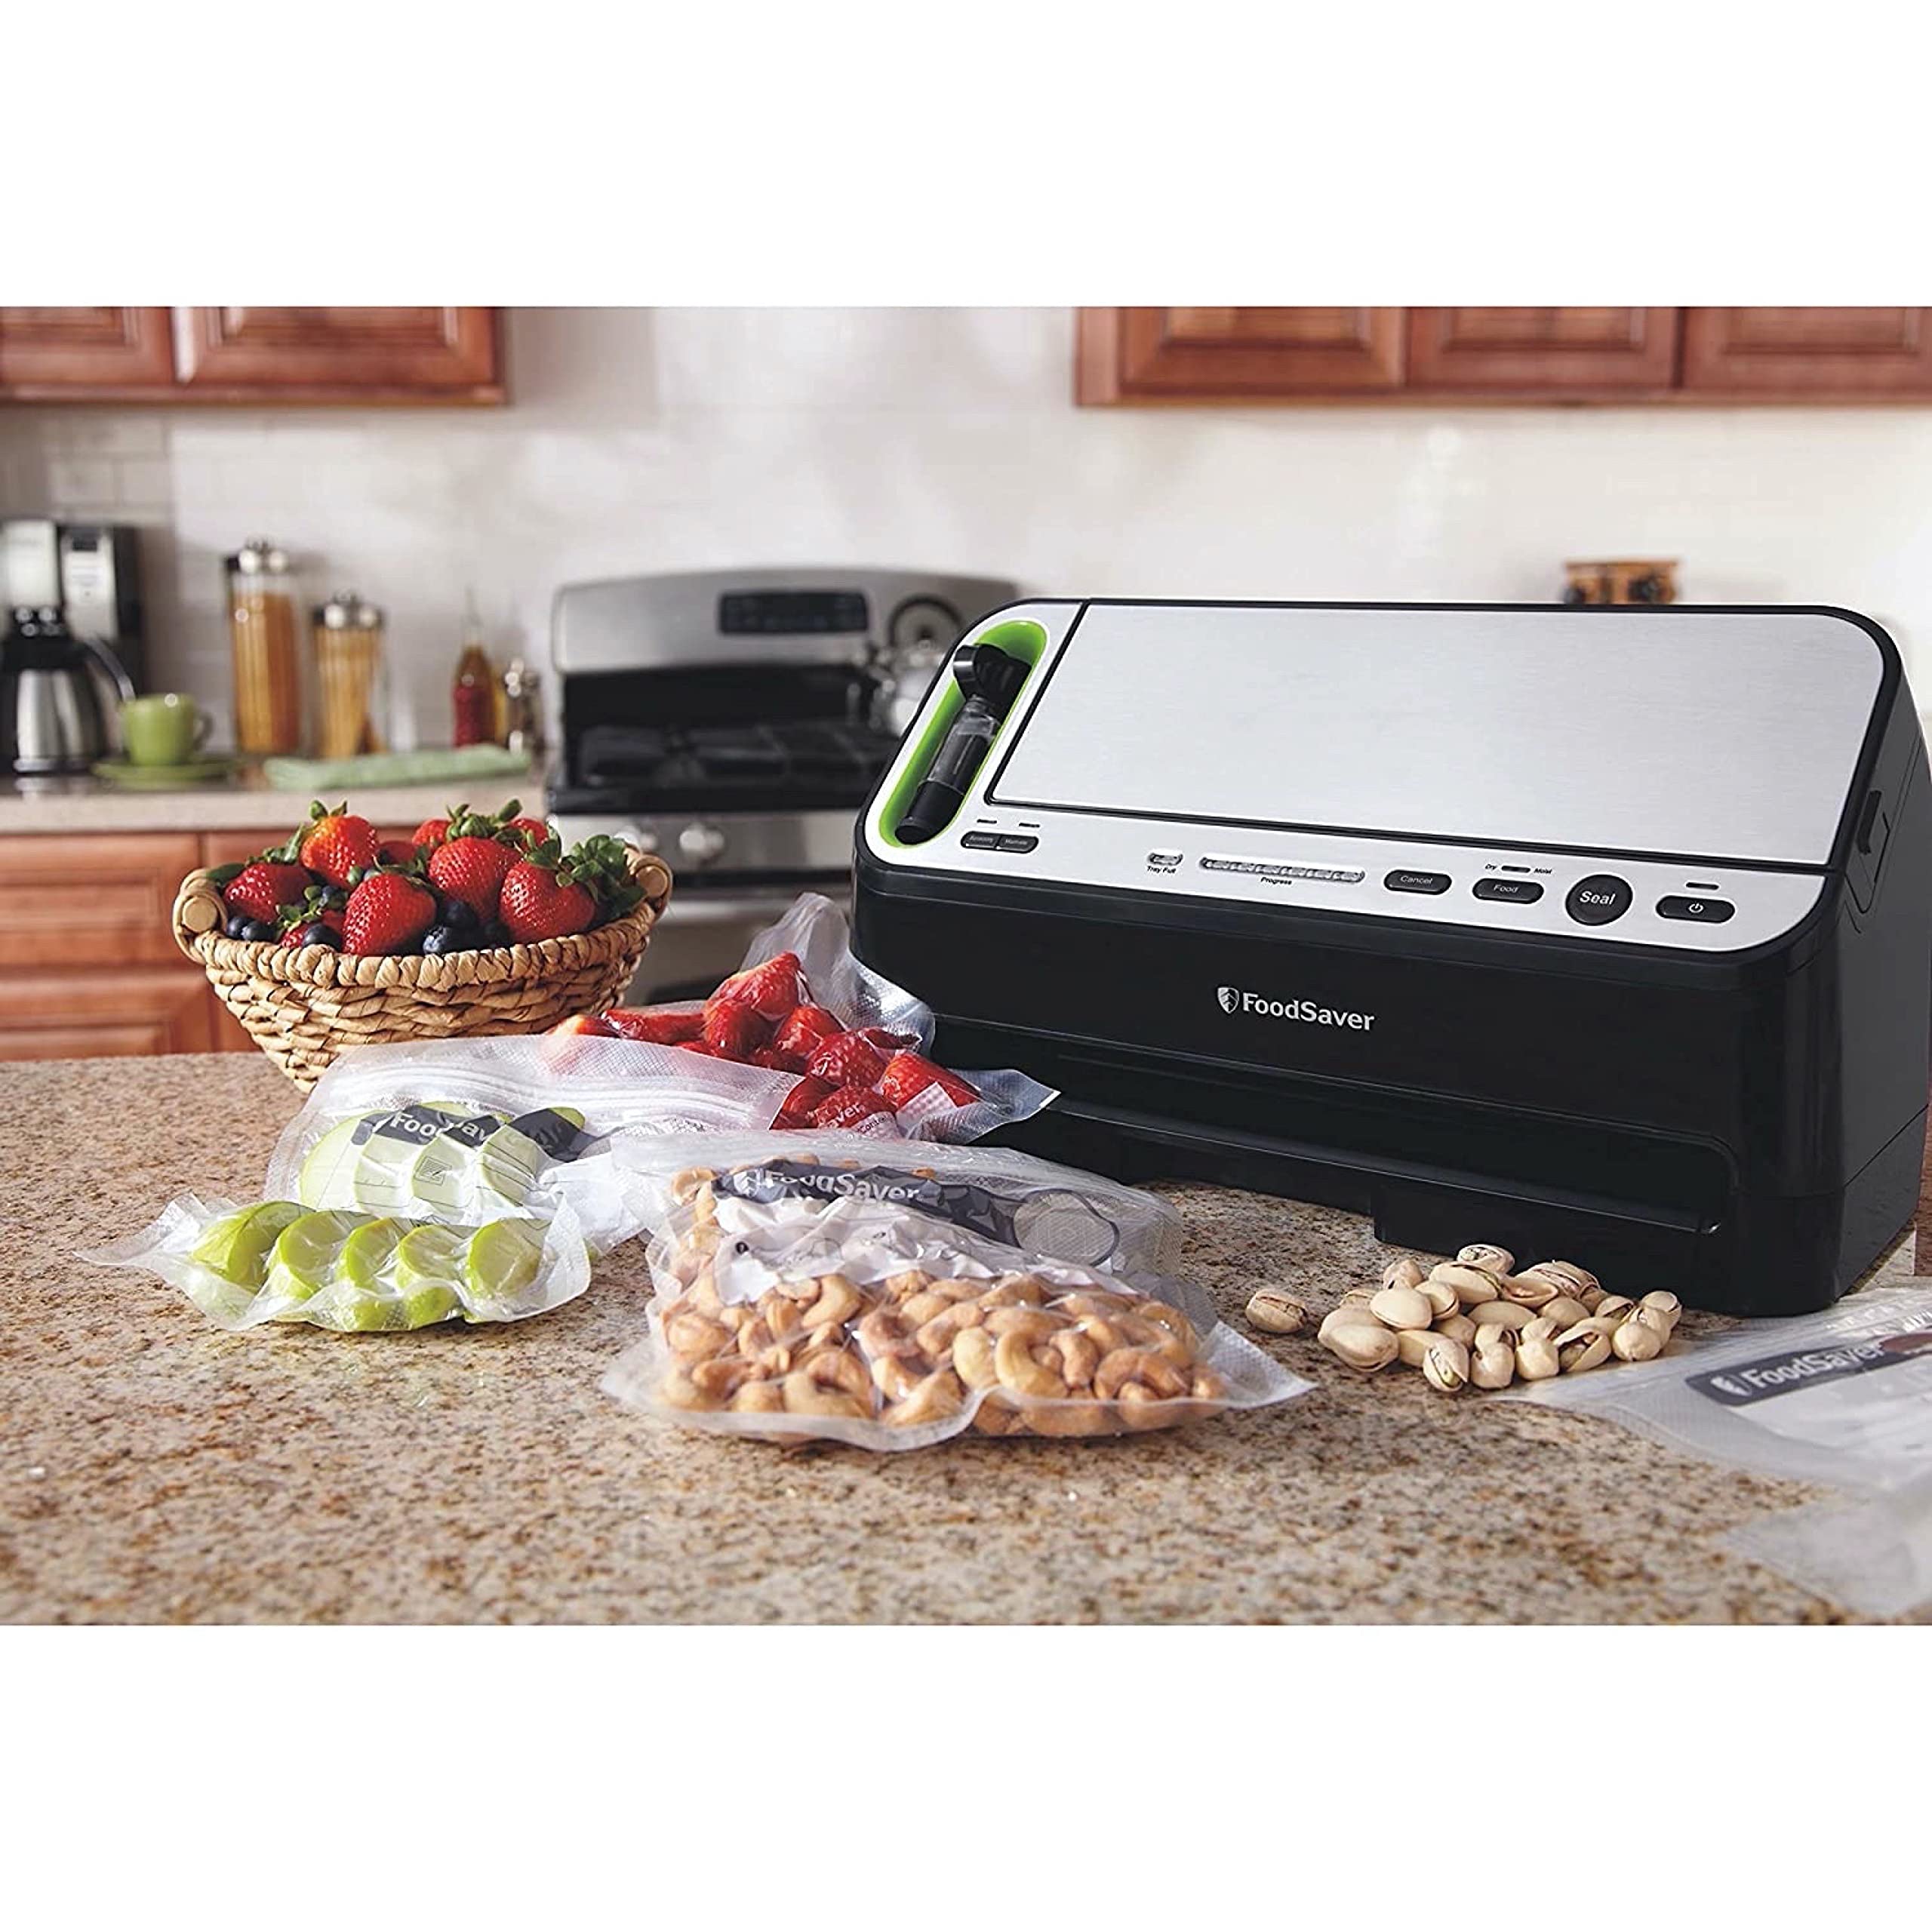 FoodSaver V4400 2-in-1 Vacuum Sealer Machine with Automatic Vacuum Sealer Bag Detection and Starter Kit, Safety Certified, Black and Silver